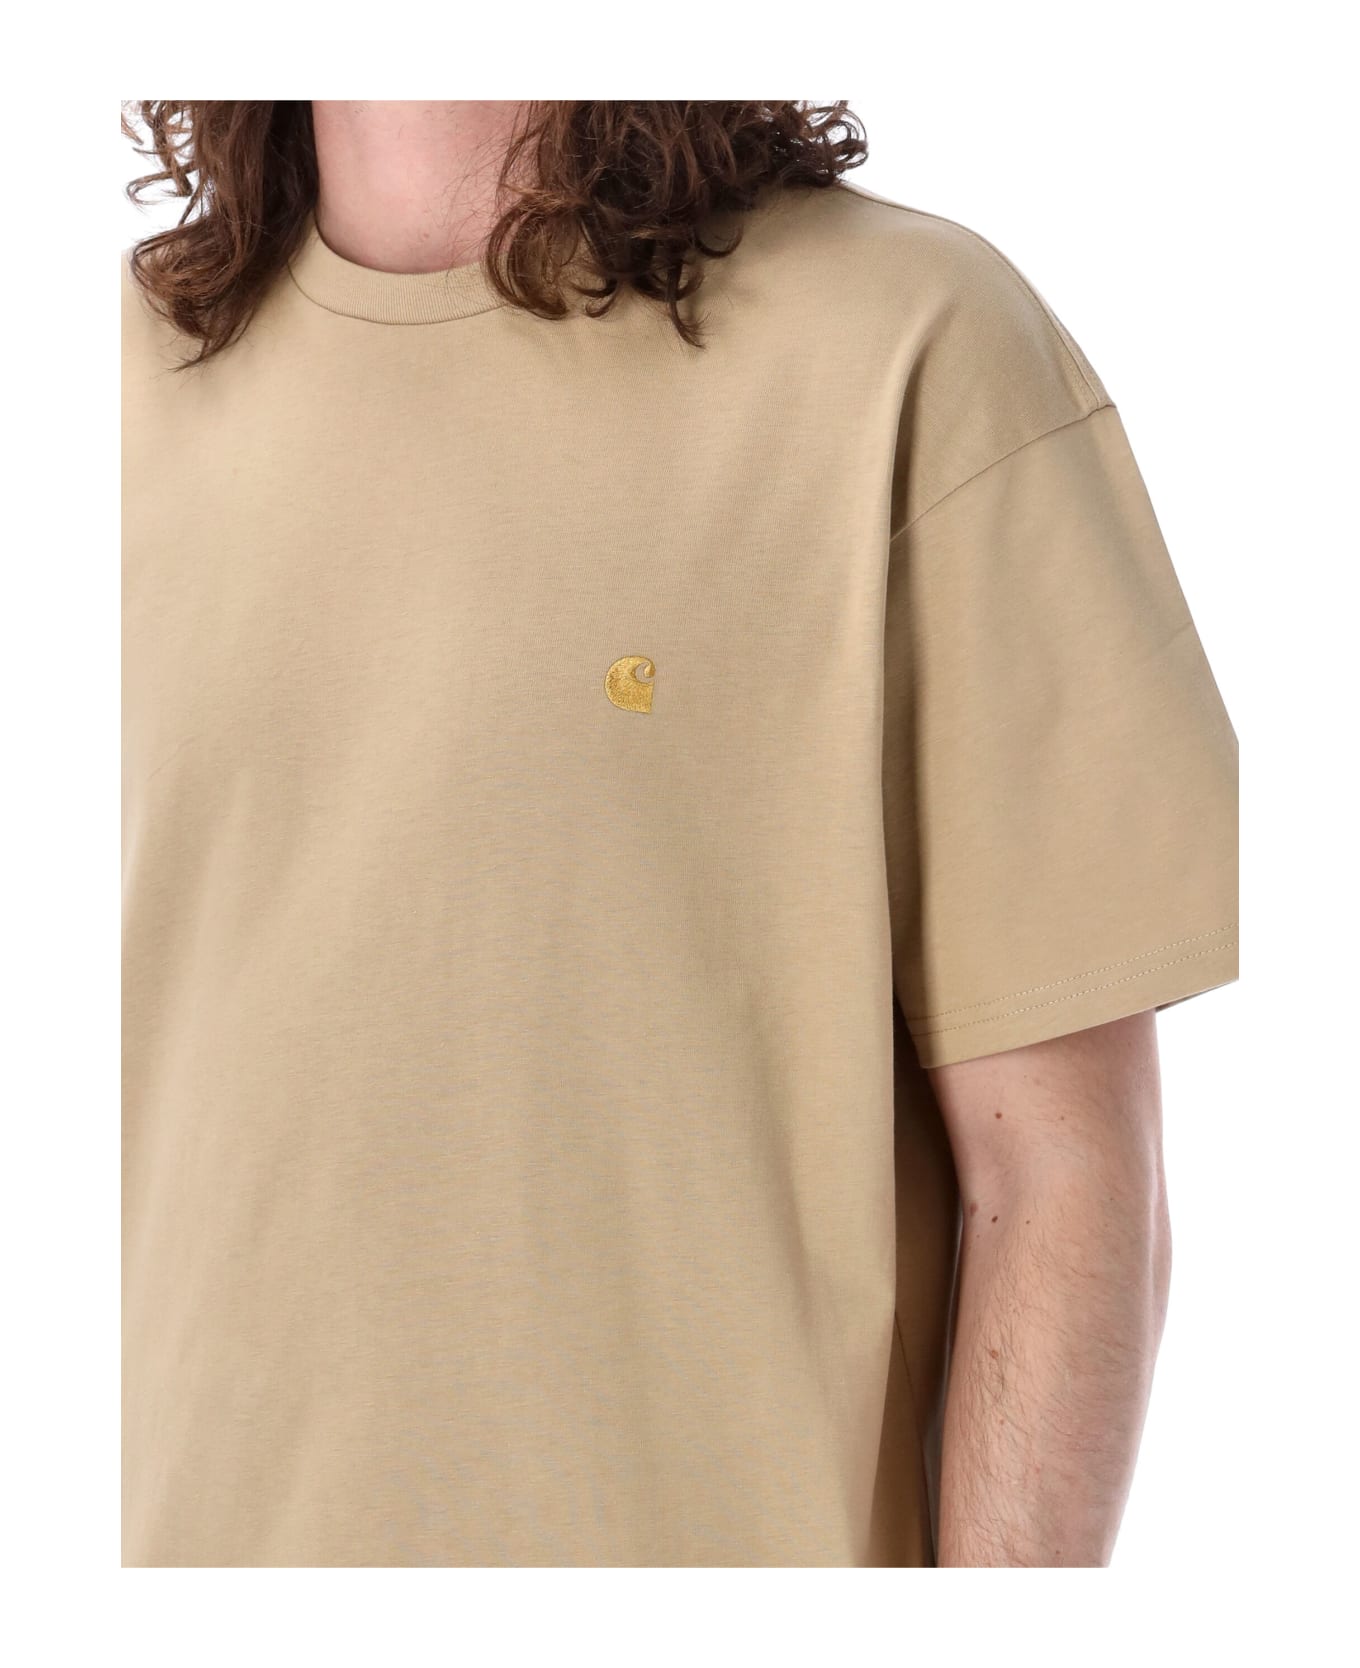 Carhartt Chase S/s T-shirt - Gold